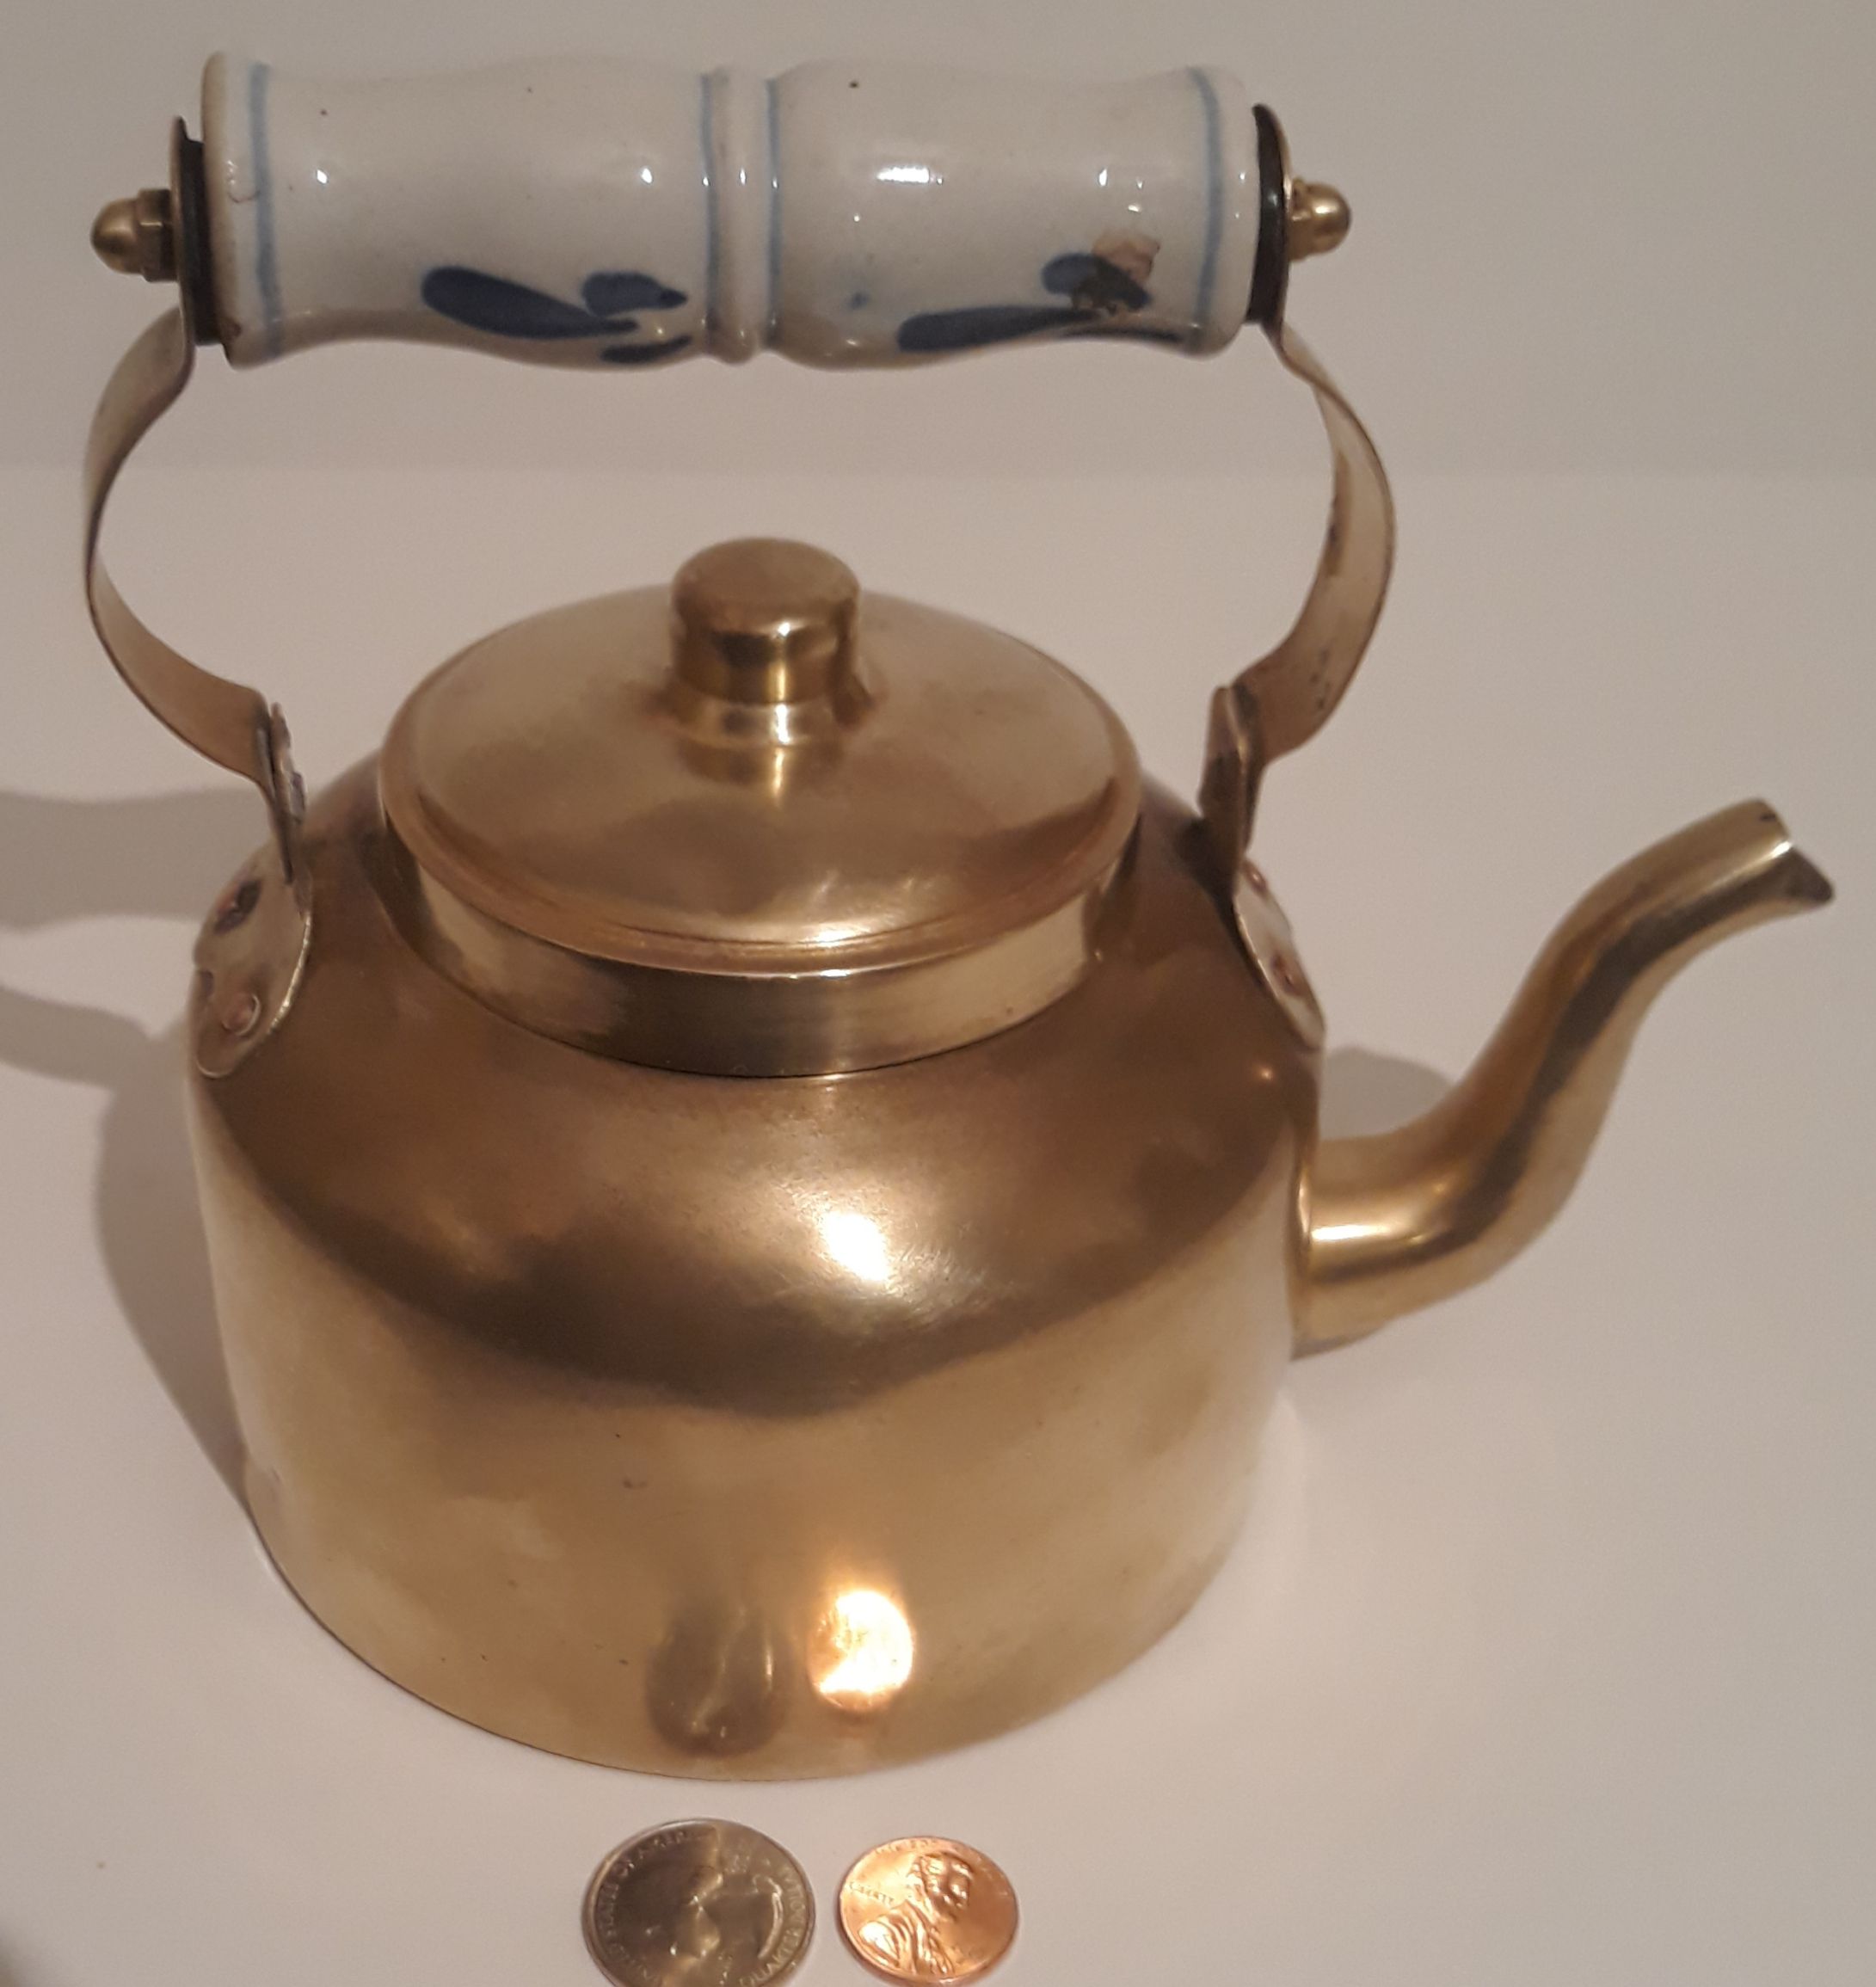 Vintage Metal Brass Teapot, Tea Kettle with Porcelain Handle, 7" x 5", Kitchen Decor, Table Display, Shelf Display, This Can Be Shined Up Even More